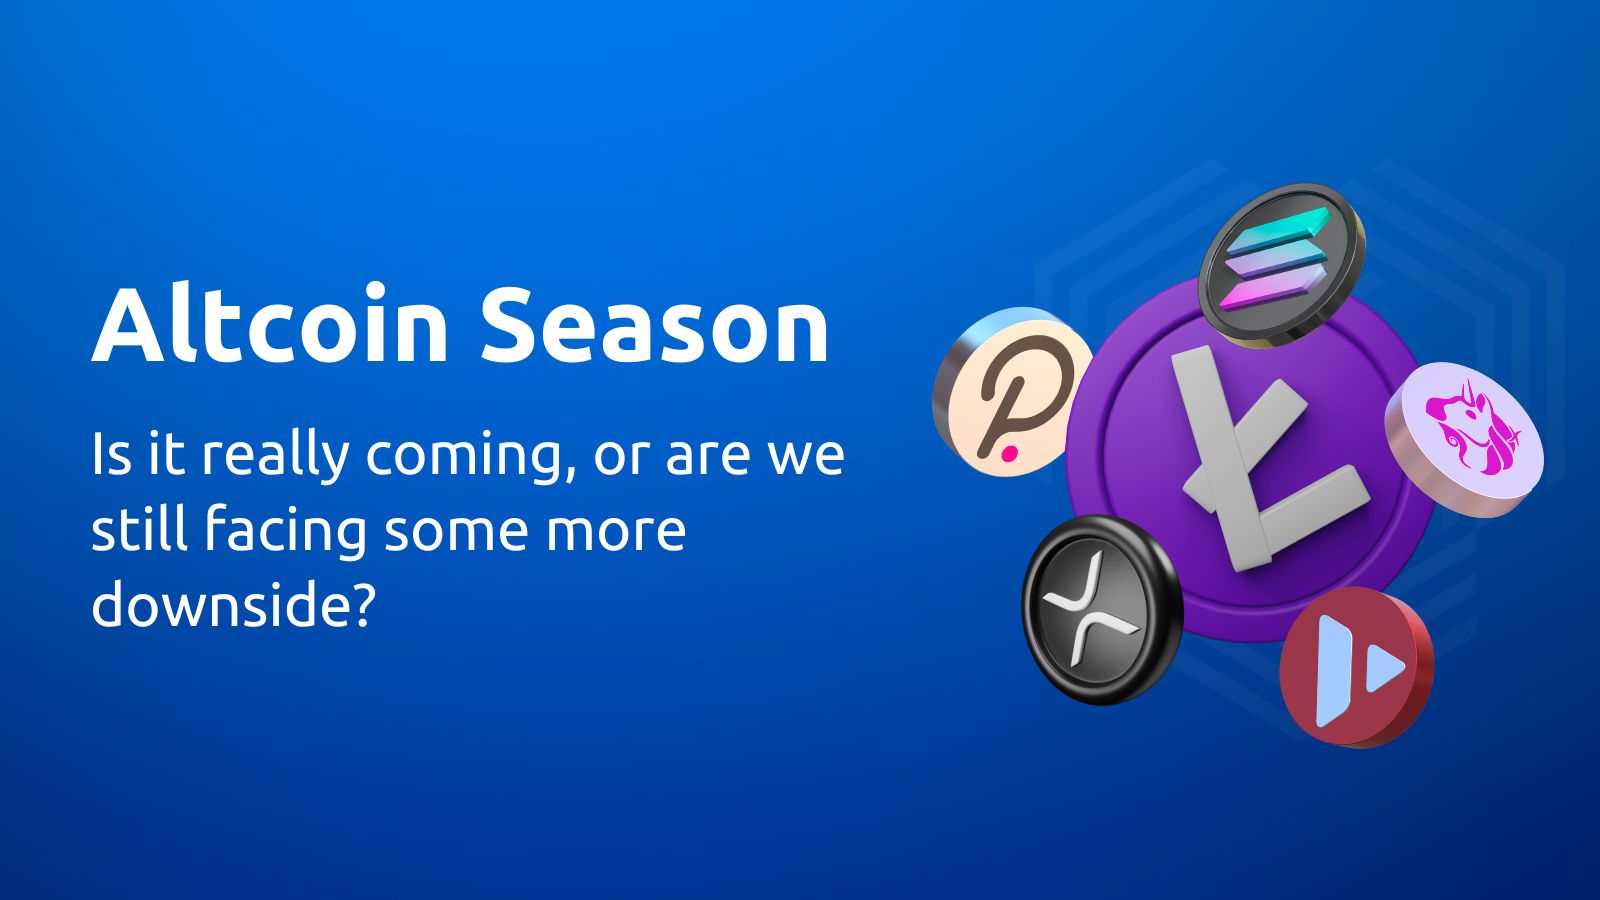 Upcoming altcoin season on the smart contracts cryptocurrency market? Learn about crypto market capitalization during altcoin season